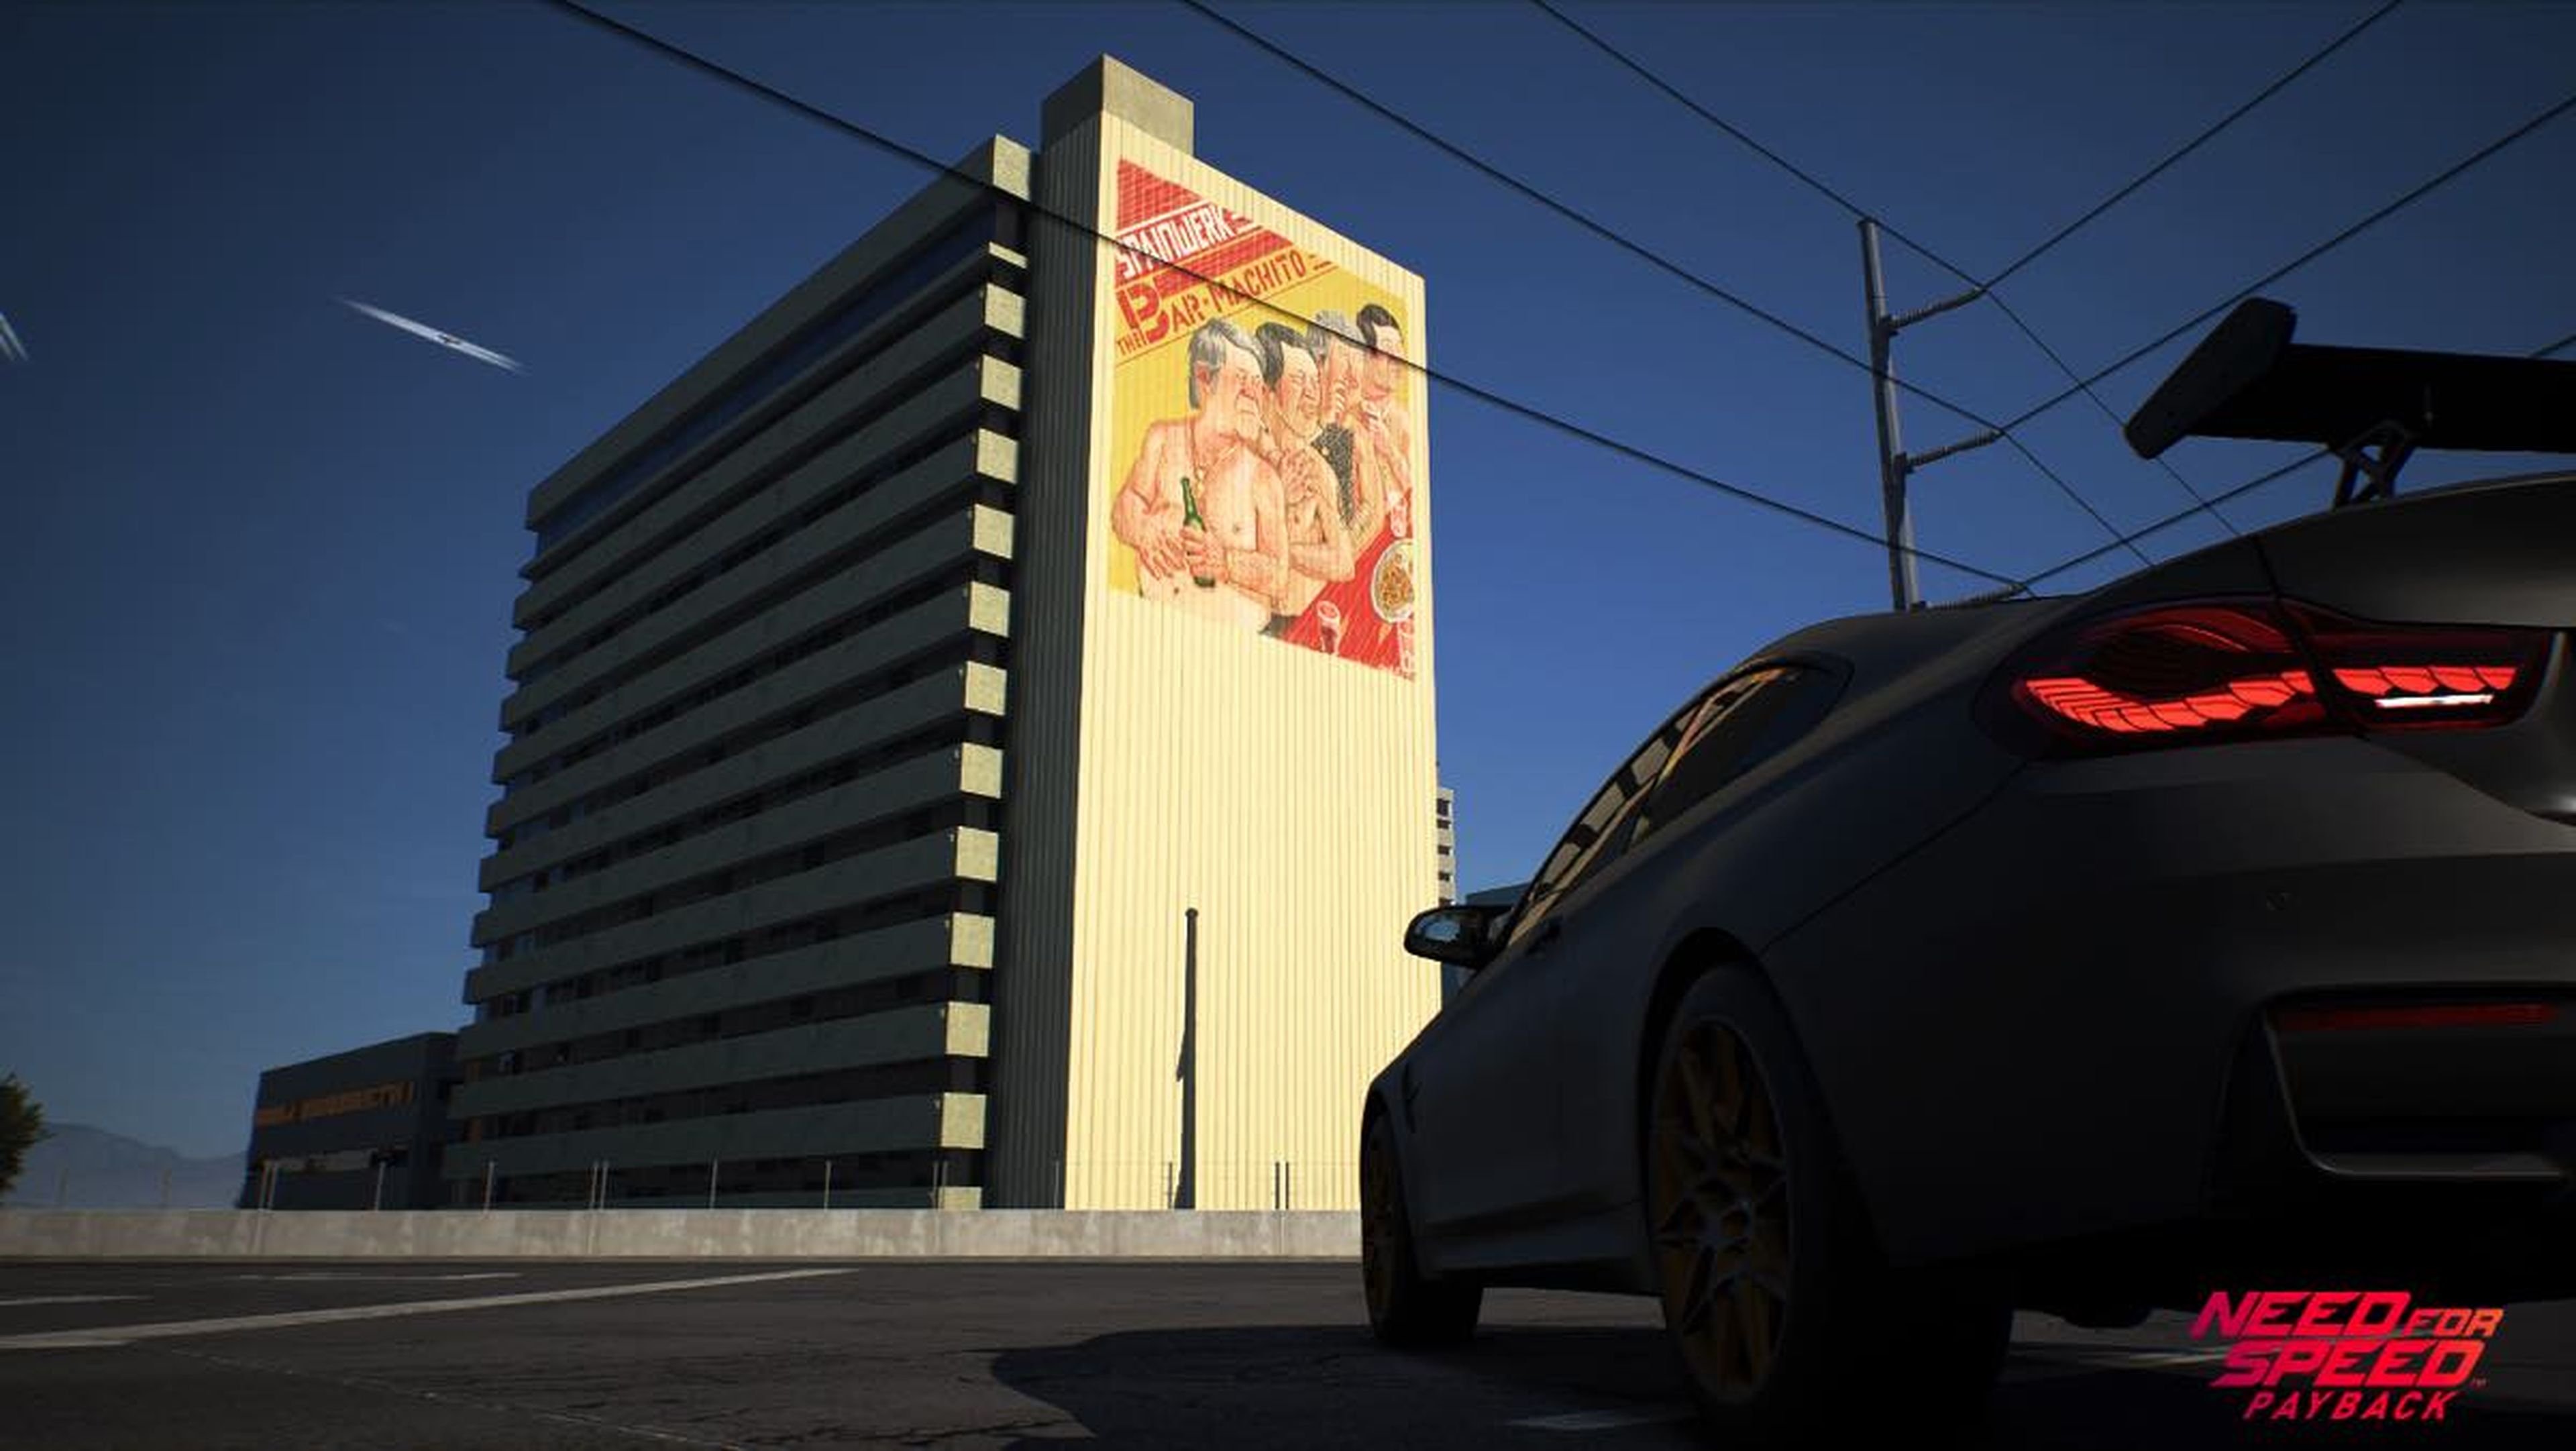 Need for Speed Payback - mural